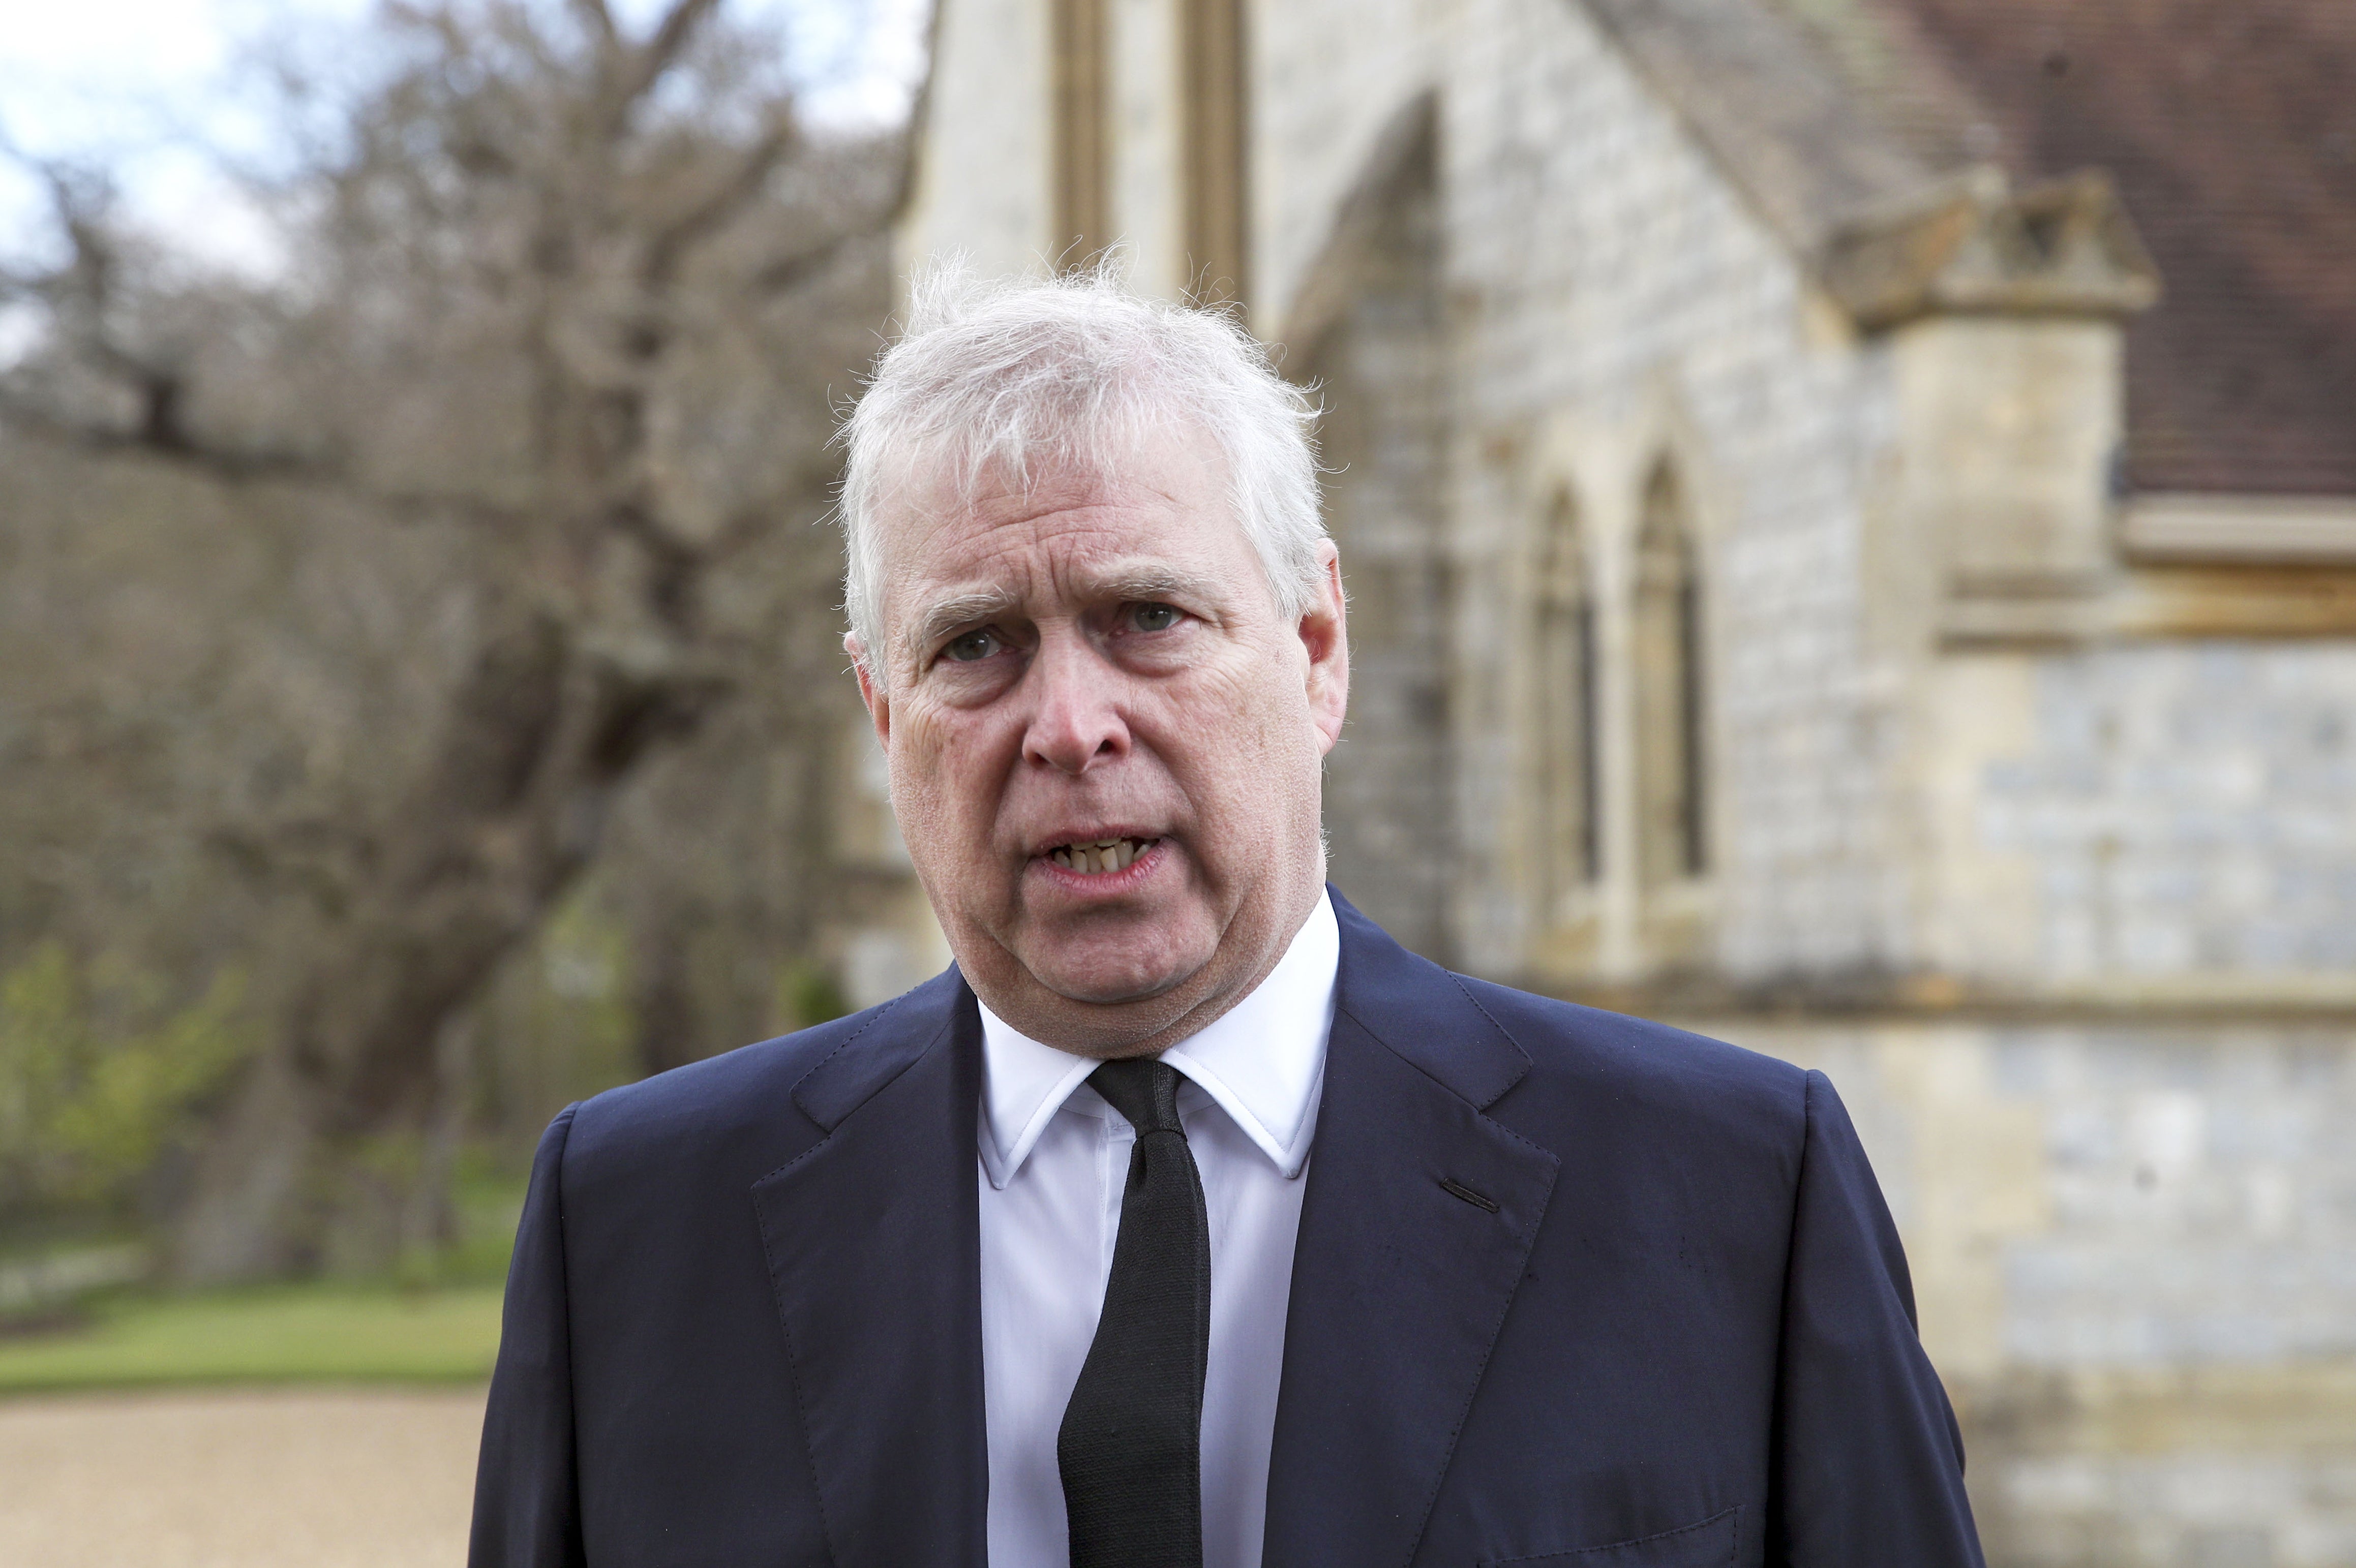 The Duke of York will give a deposition on 10 March